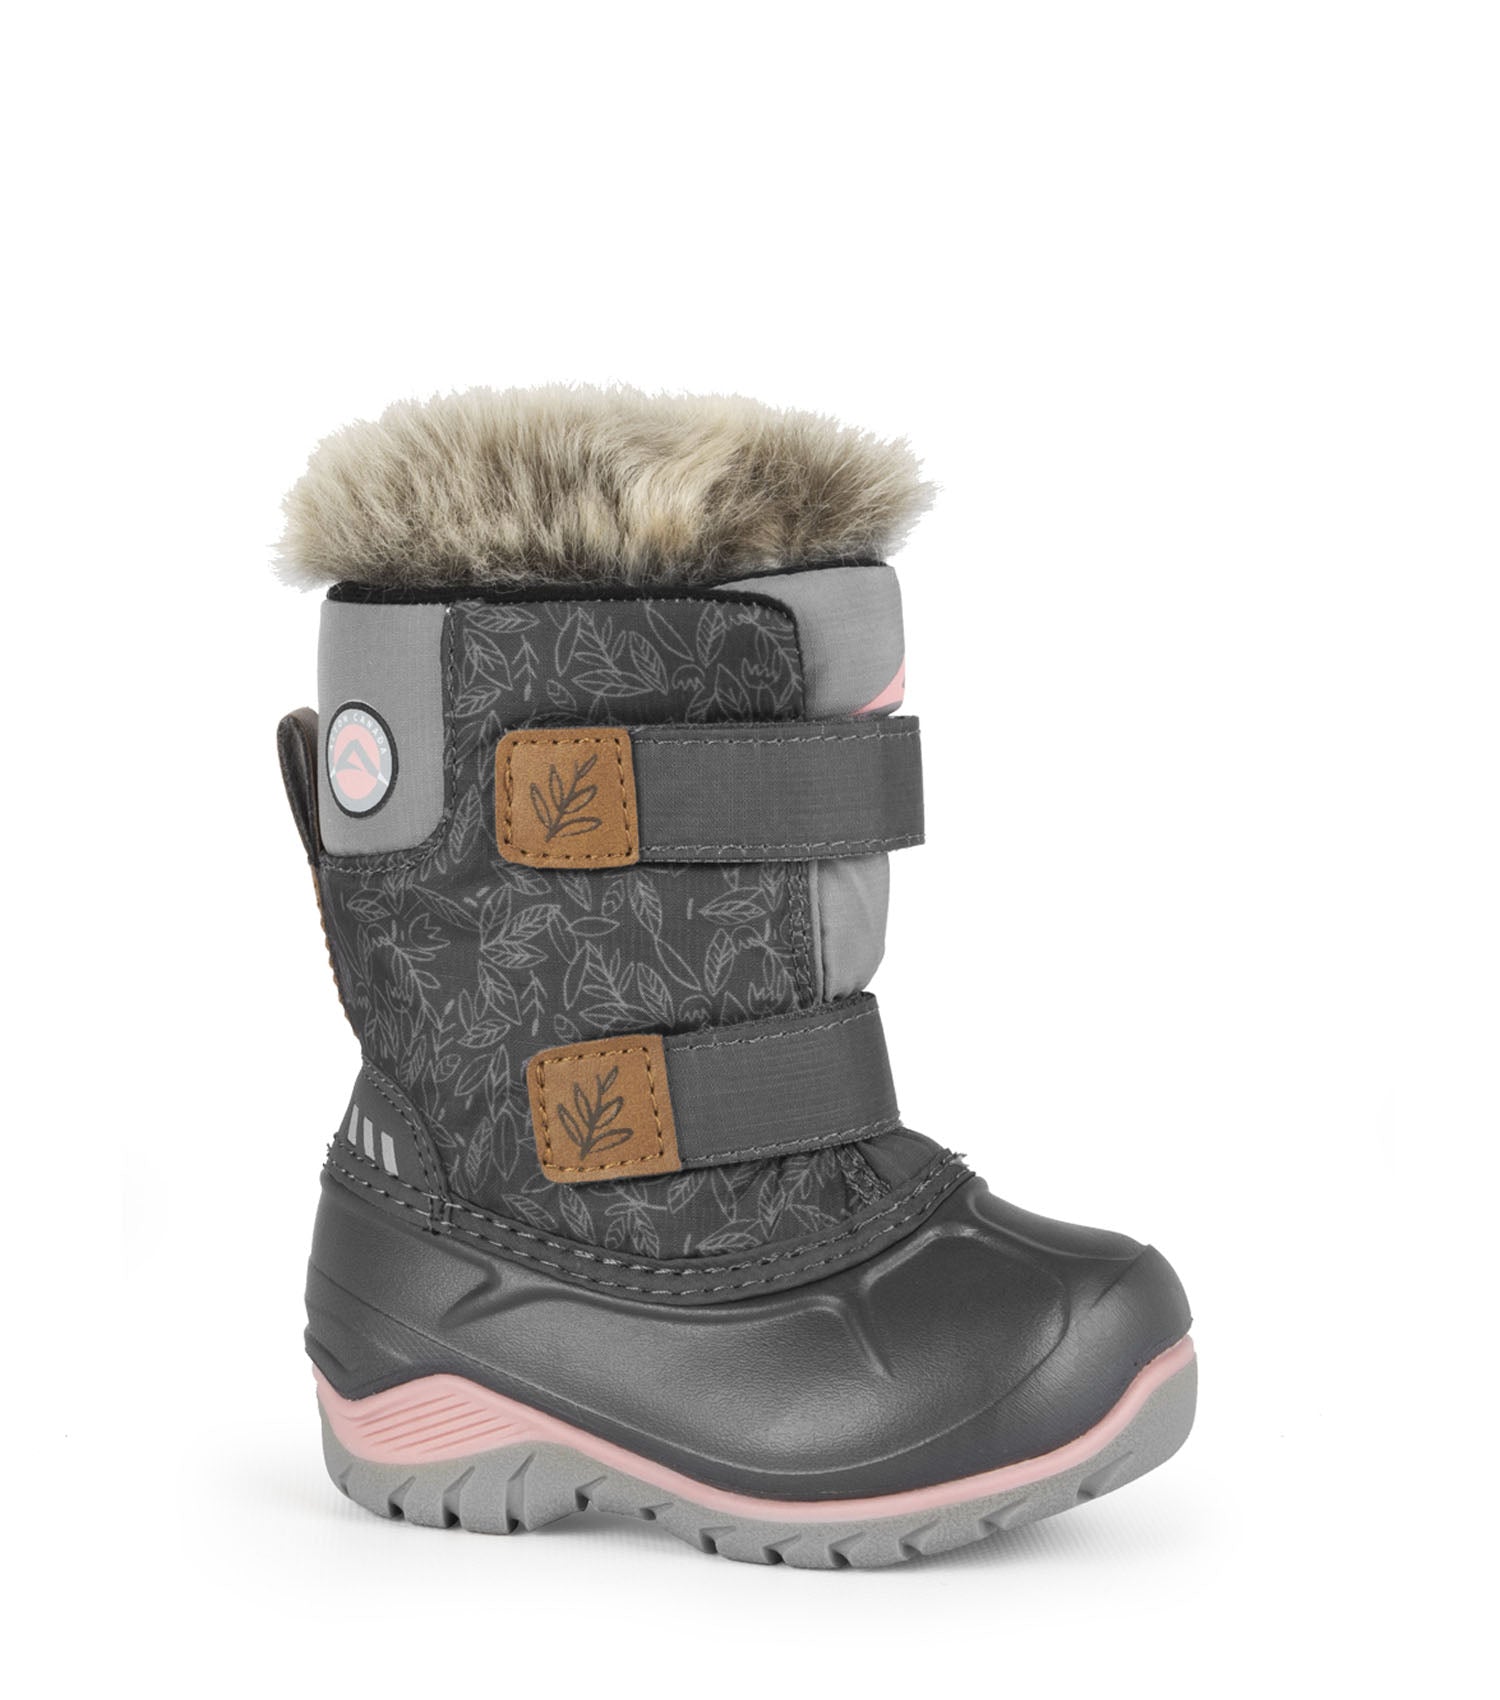 Girl's Winter Boots on Sale! EXTRA 35% OFF Cute Winter Styles!